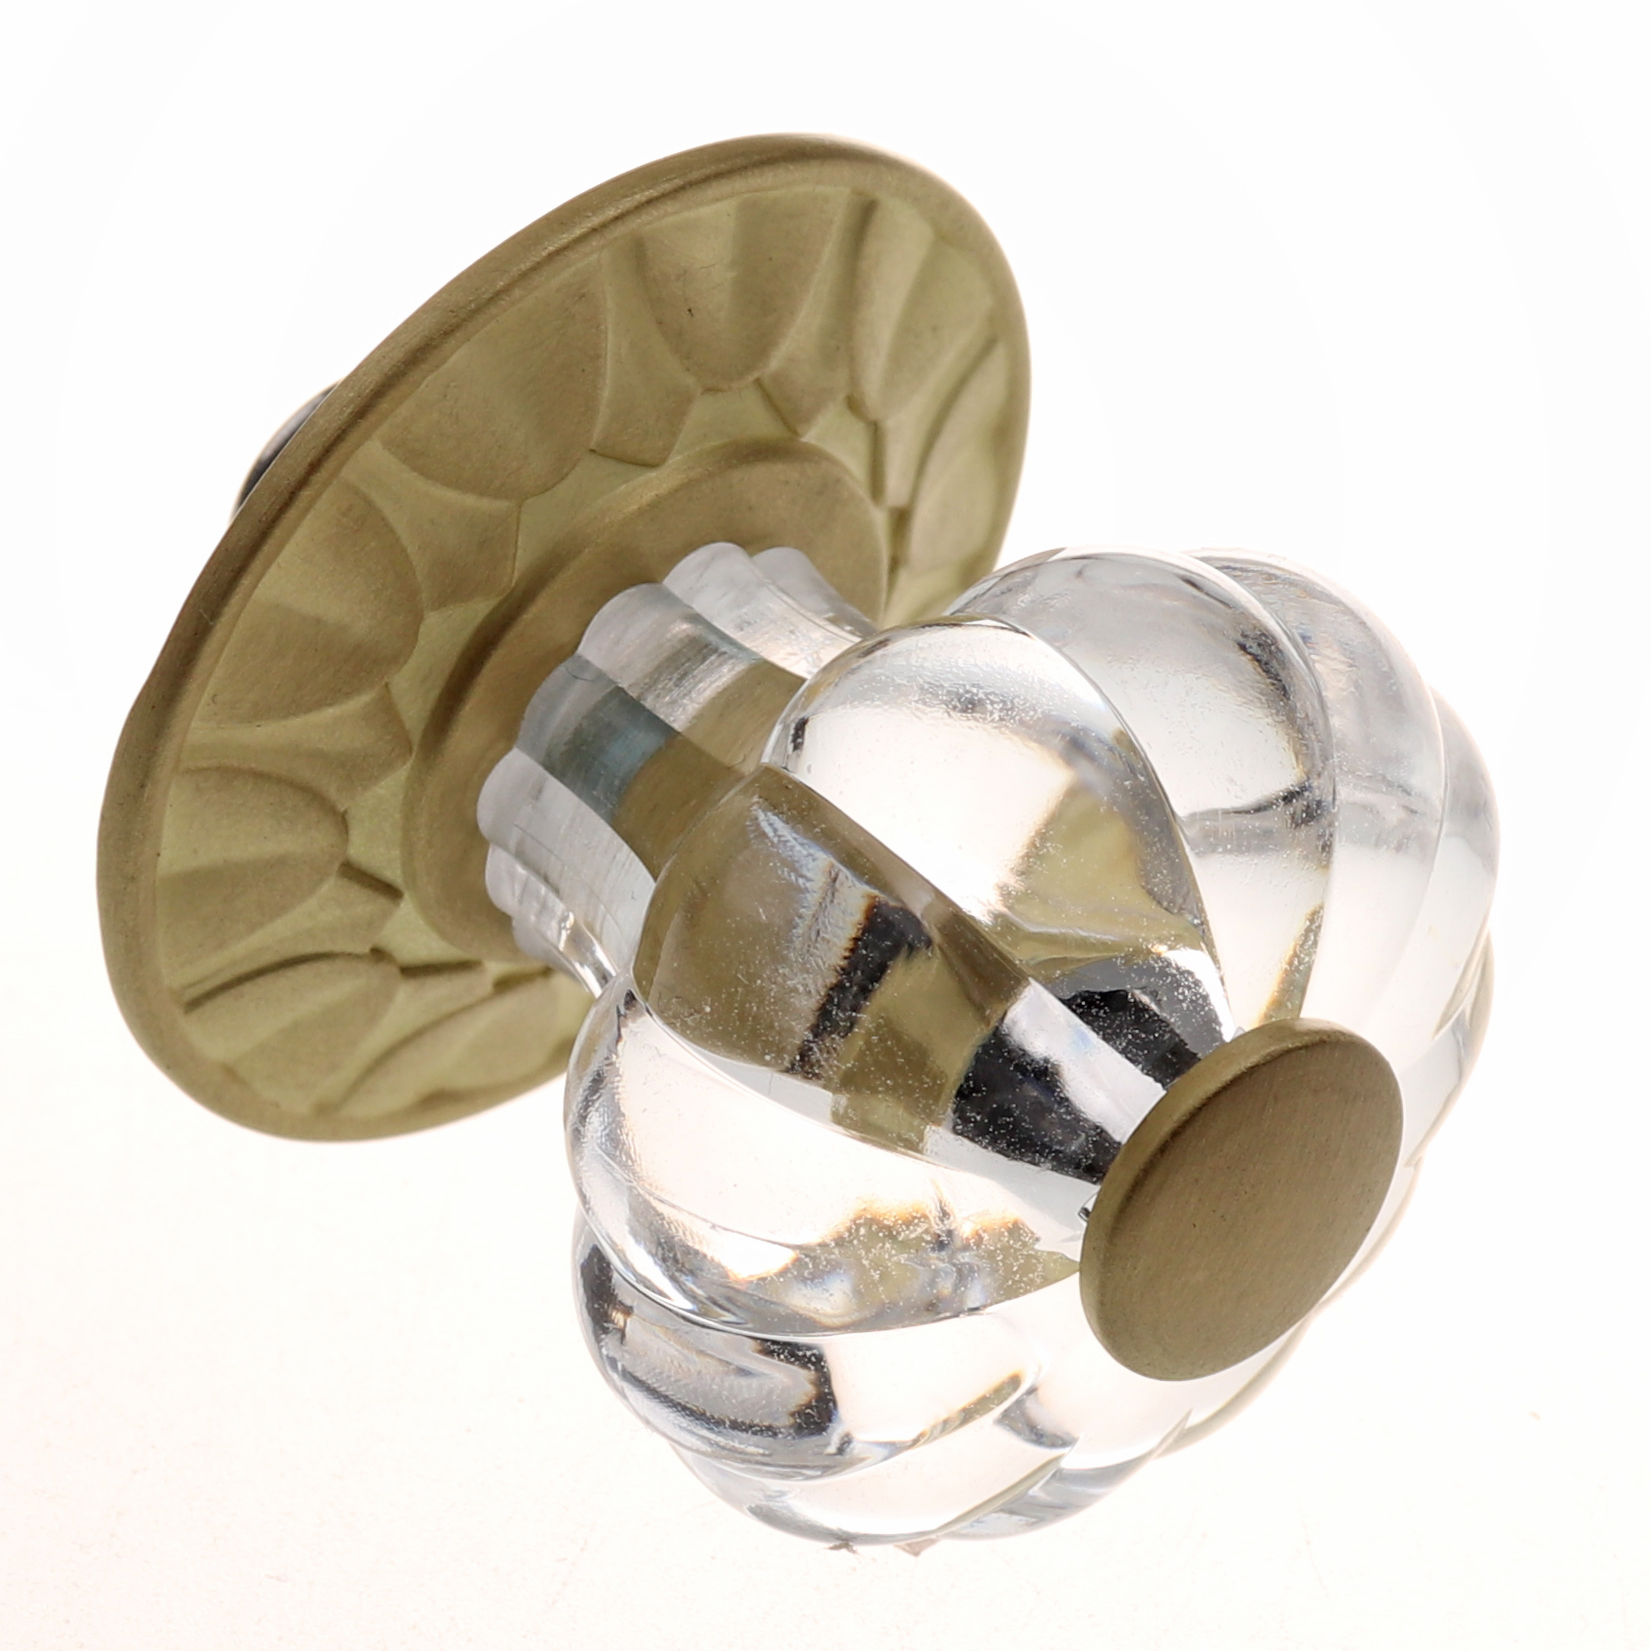 1-1/4-inch Clear Acrylic Melon Cabinet Knob with Satin Gold Backplate - 235140-SG ( Pack of 10) - image 2 of 3